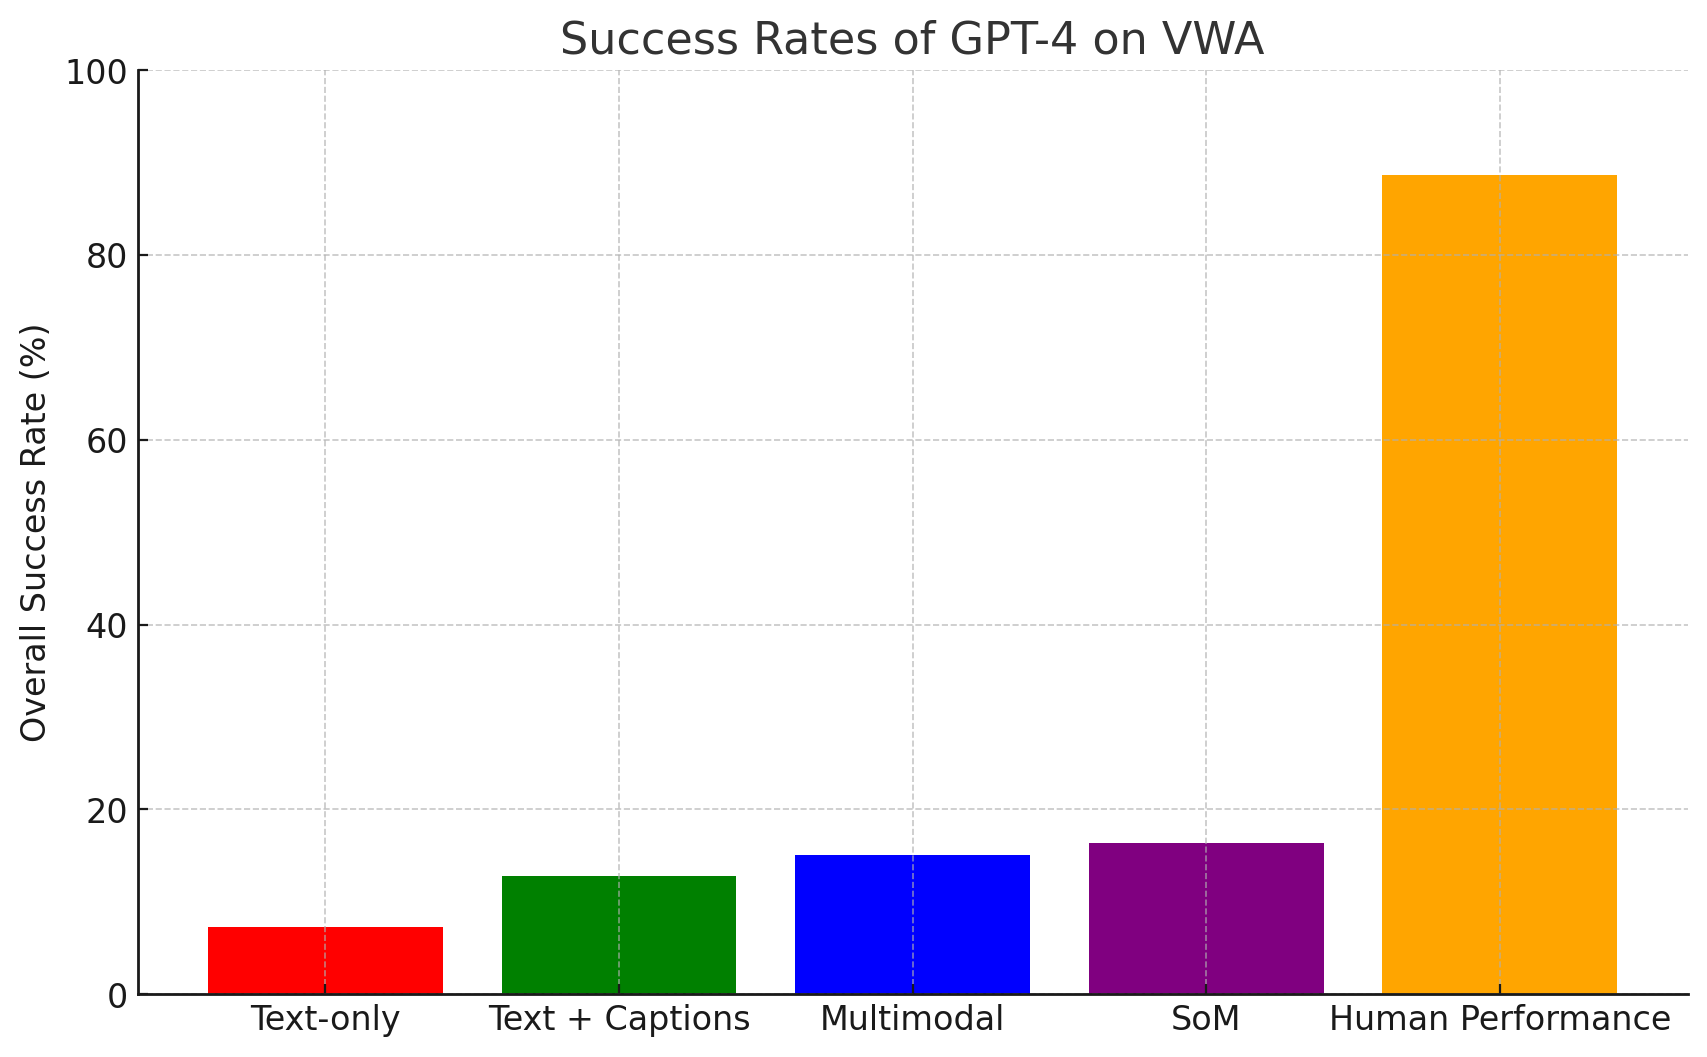 Success rates of various agents on VWA.